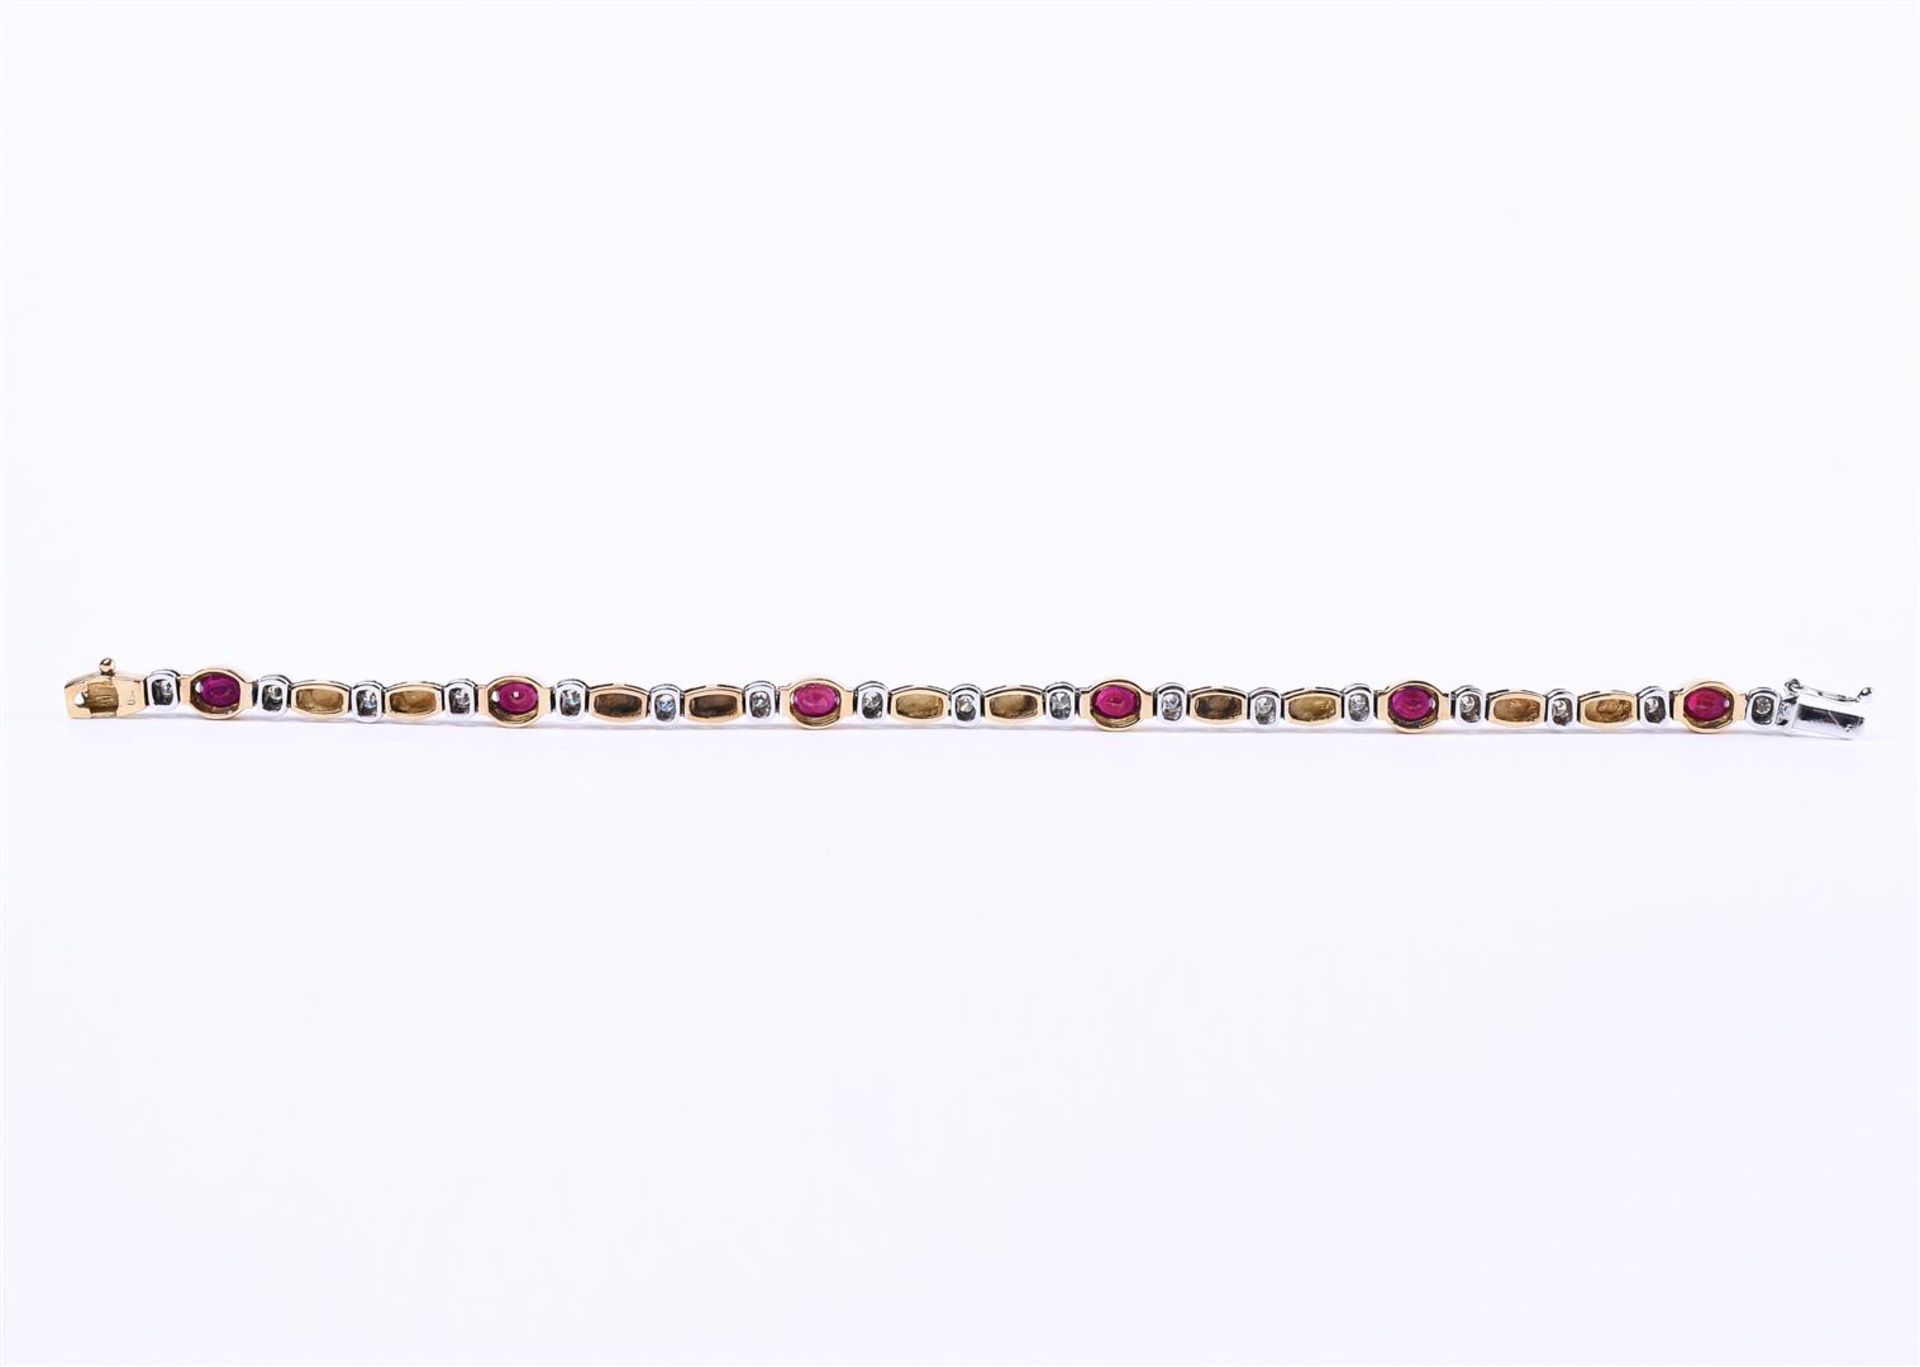 18 carat bicolor ladies bracelet alternating with oval matted and round polished links - Bild 3 aus 5